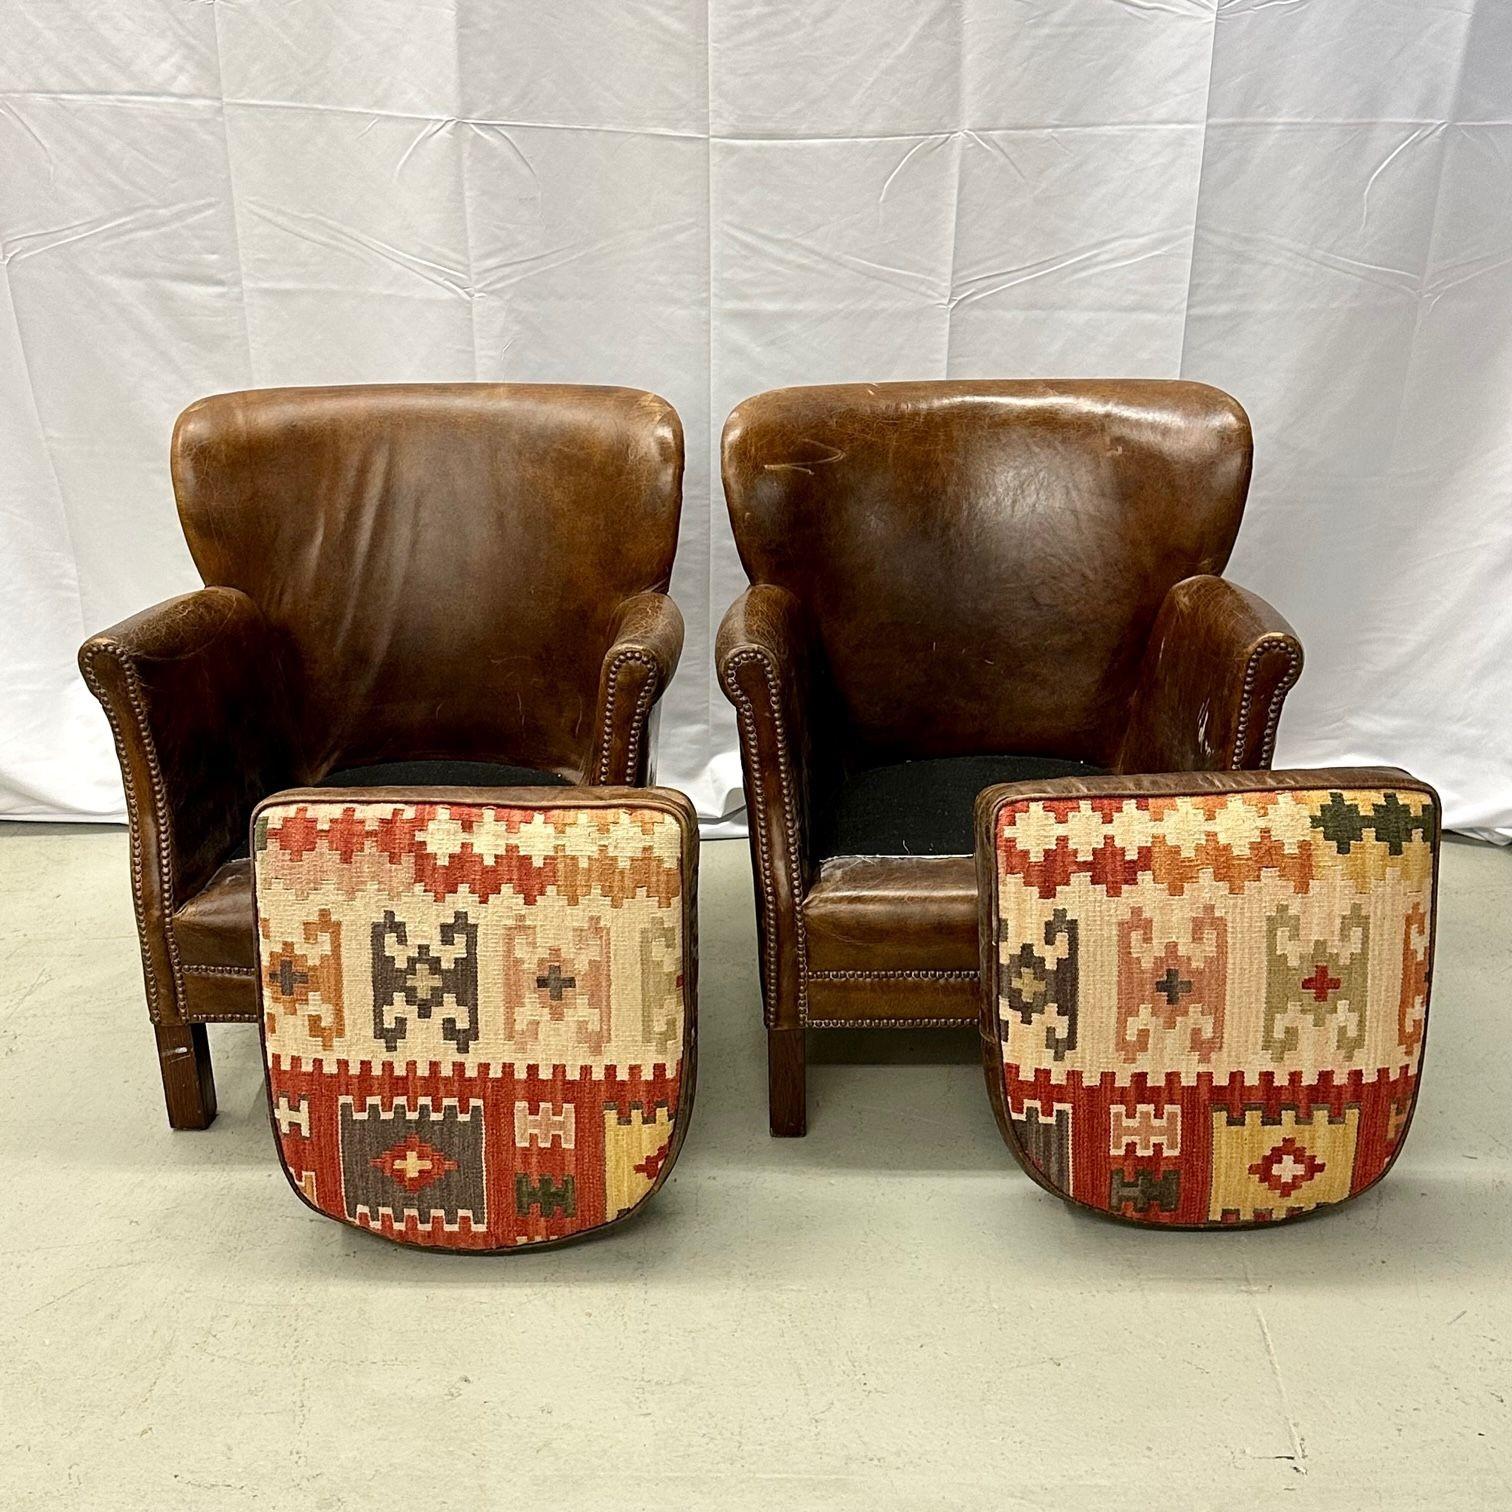 20th Century Pair of Petite Distressed Leather Club / Lounge / Arm Chairs, Danish Style